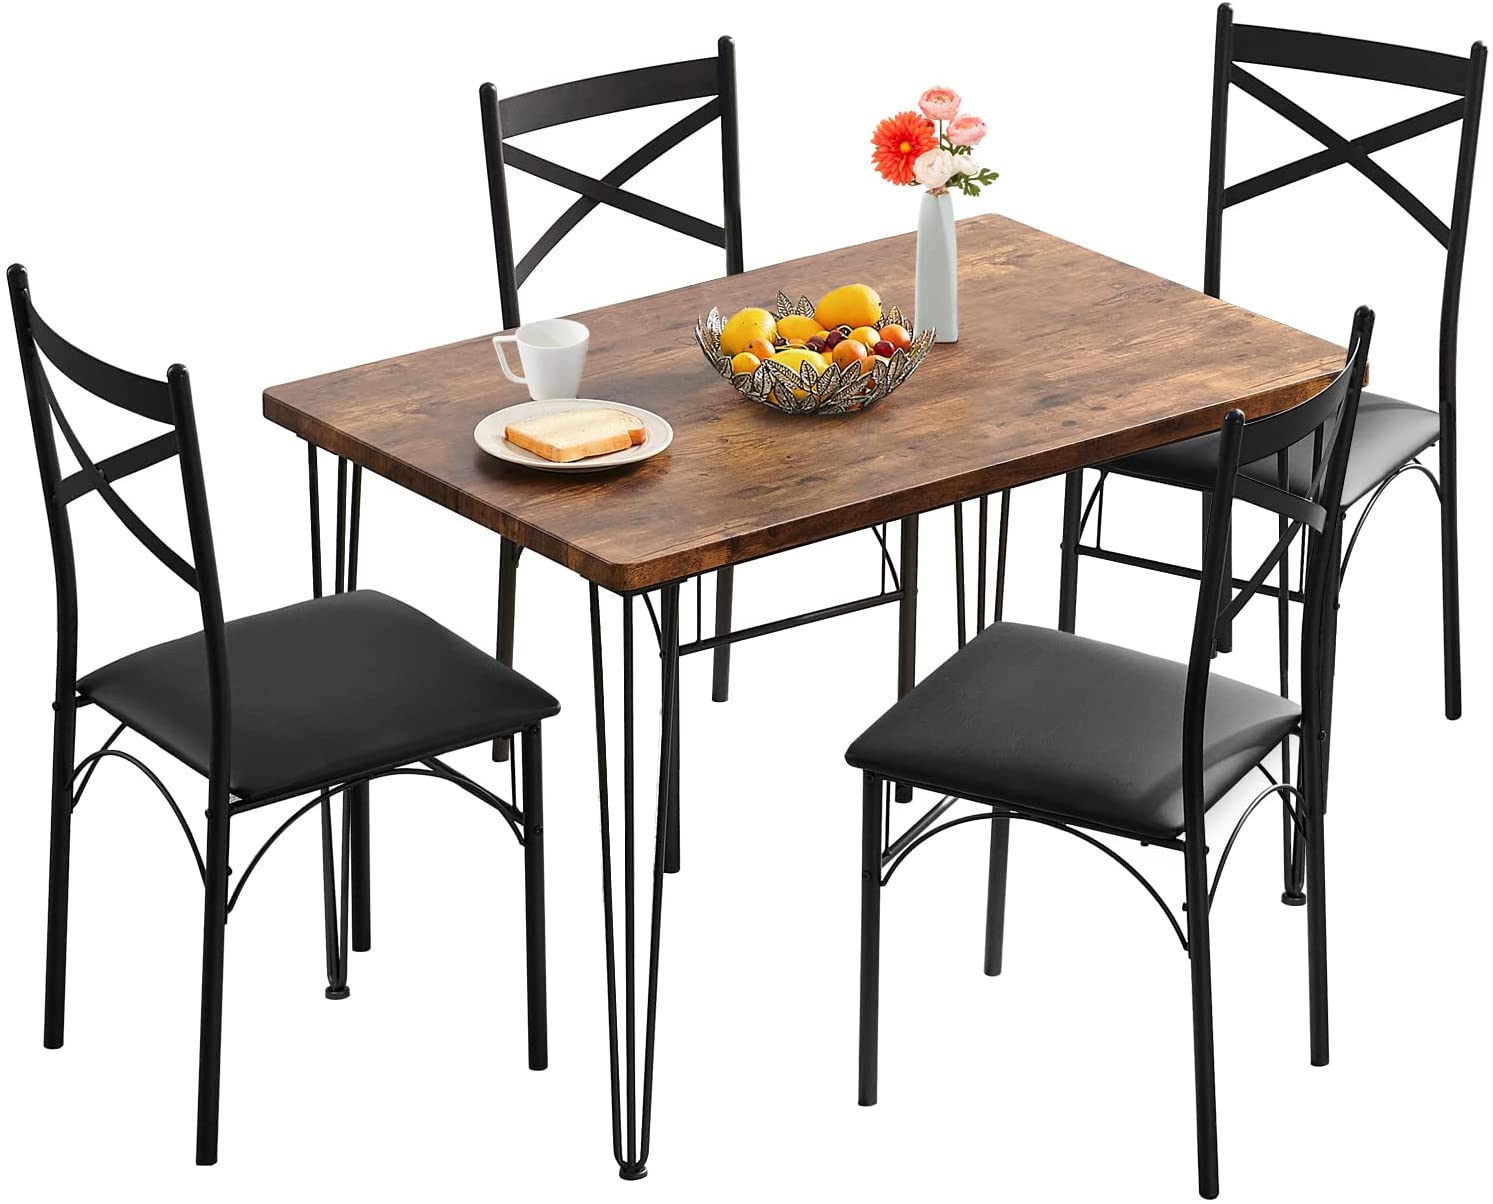 VECELO 5-Piece Dining Table Set Modern Rectangular Table for Dining Room/Kitchen